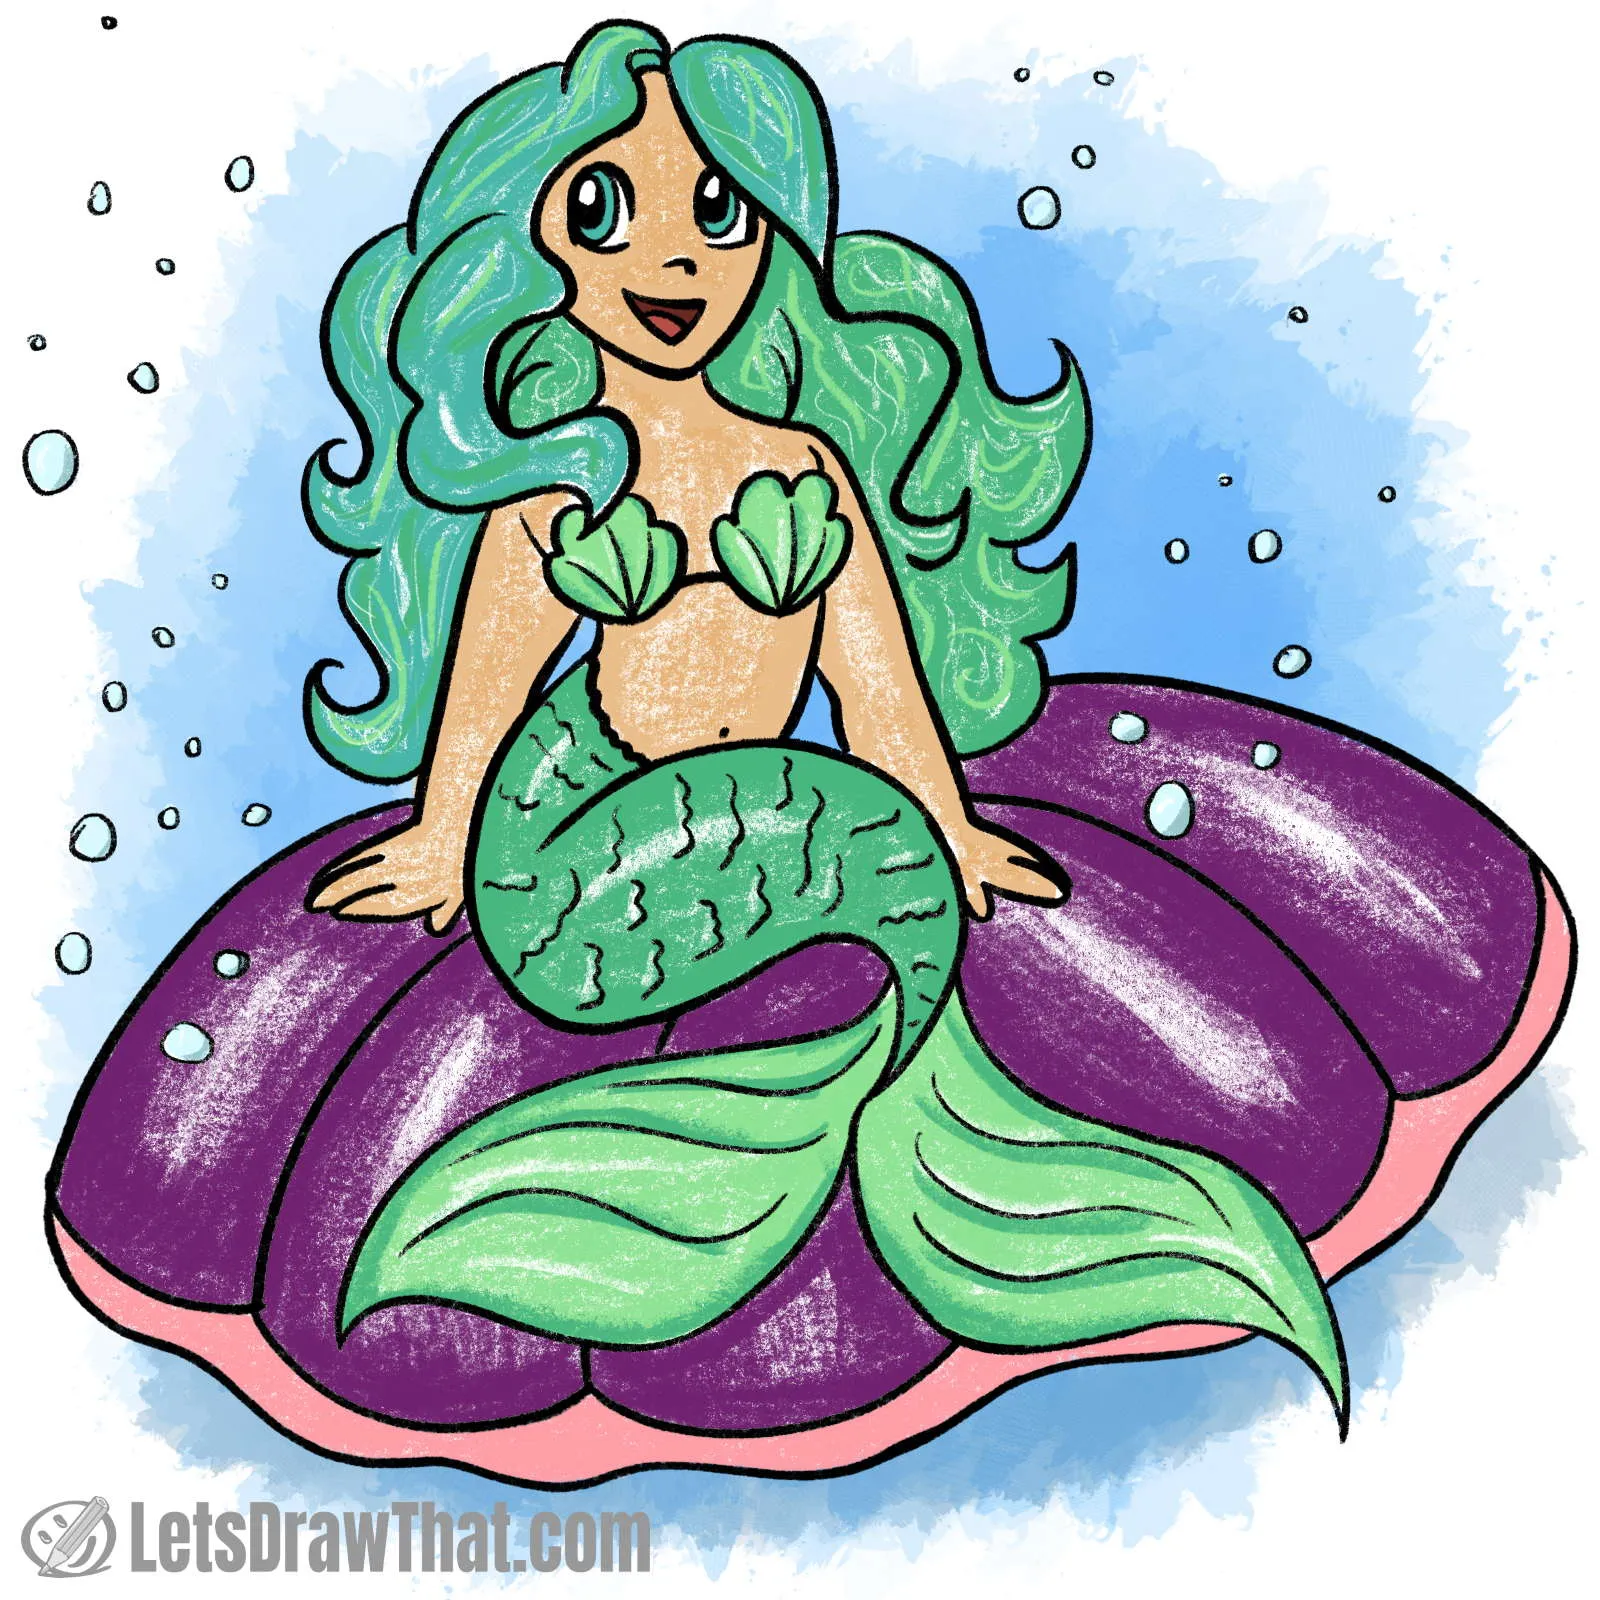 How to draw a mermaid: finished drawing coloured-in